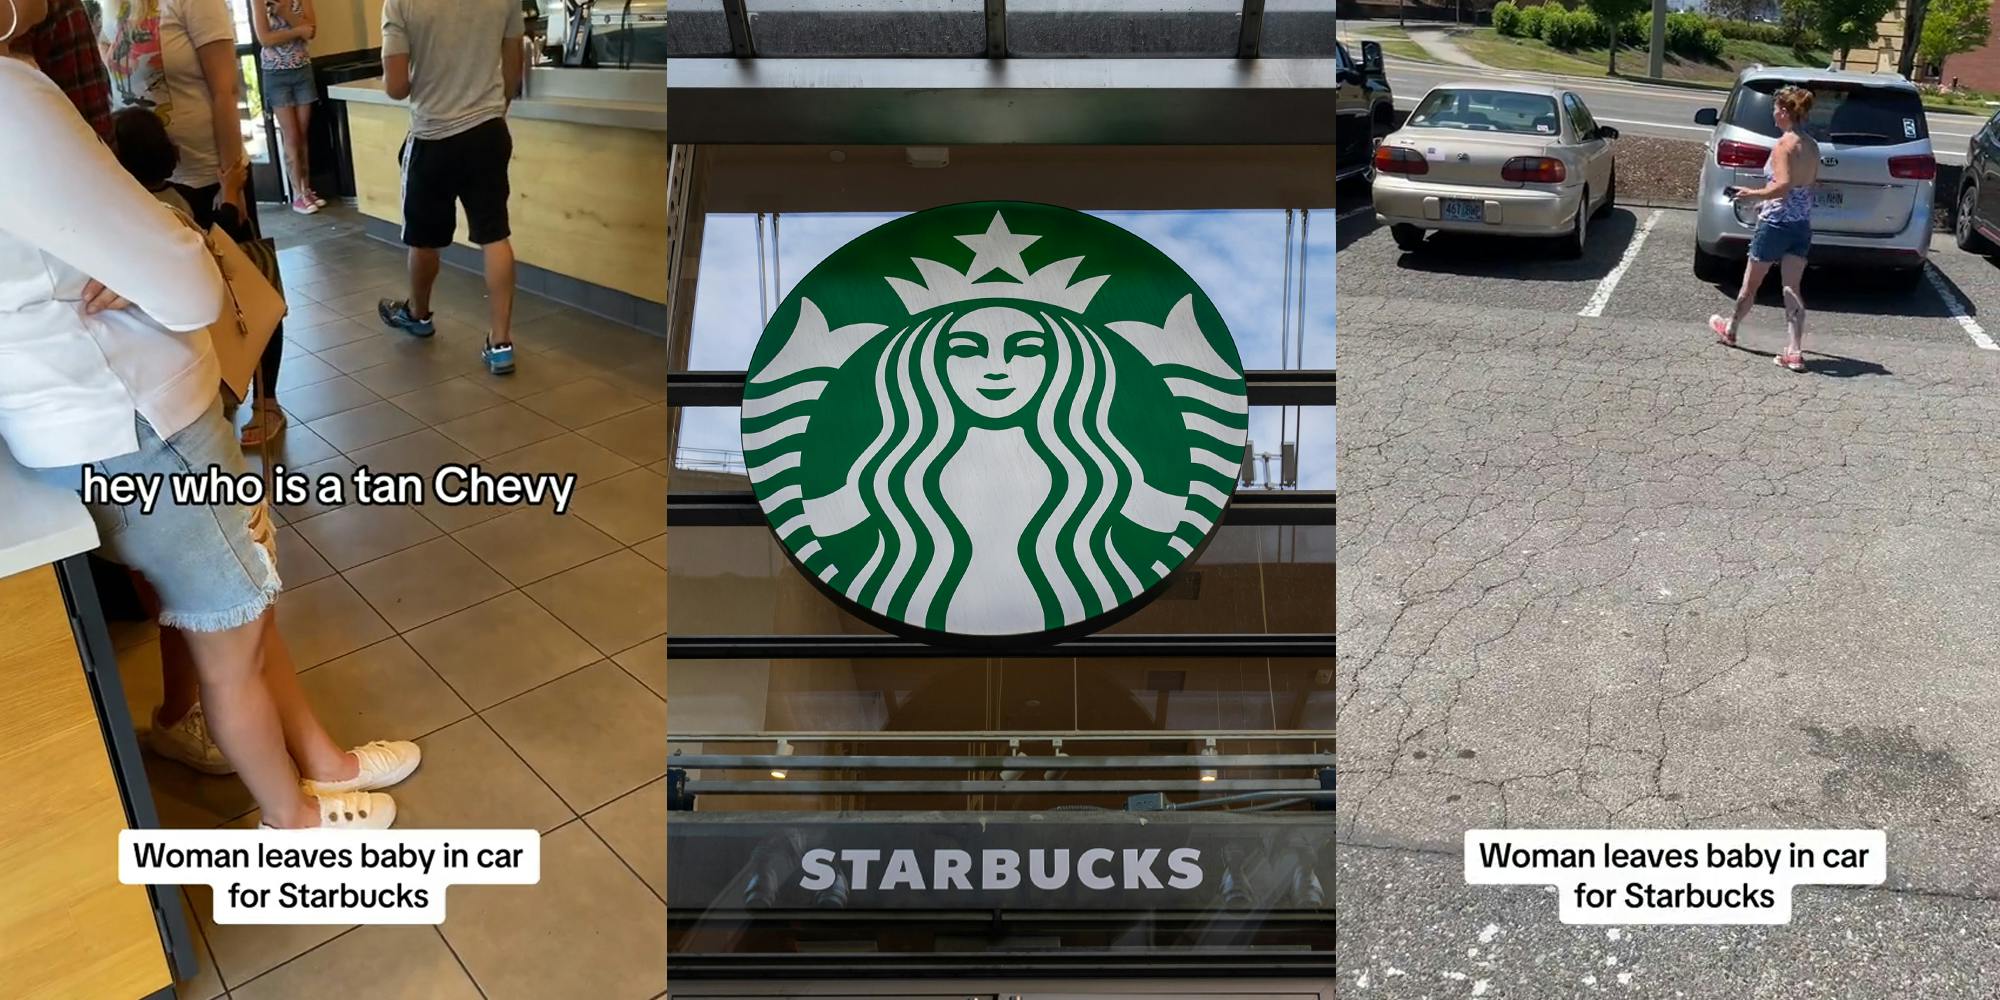 Starbucks customers inside with caption "hey who is a tan Chevy" "Woman leaves baby in car for Starbucks" (l) Starbucks signs above door (c) woman walking in Starbucks parking lot with caption "Woman leaves baby in car for Starbucks" (r)